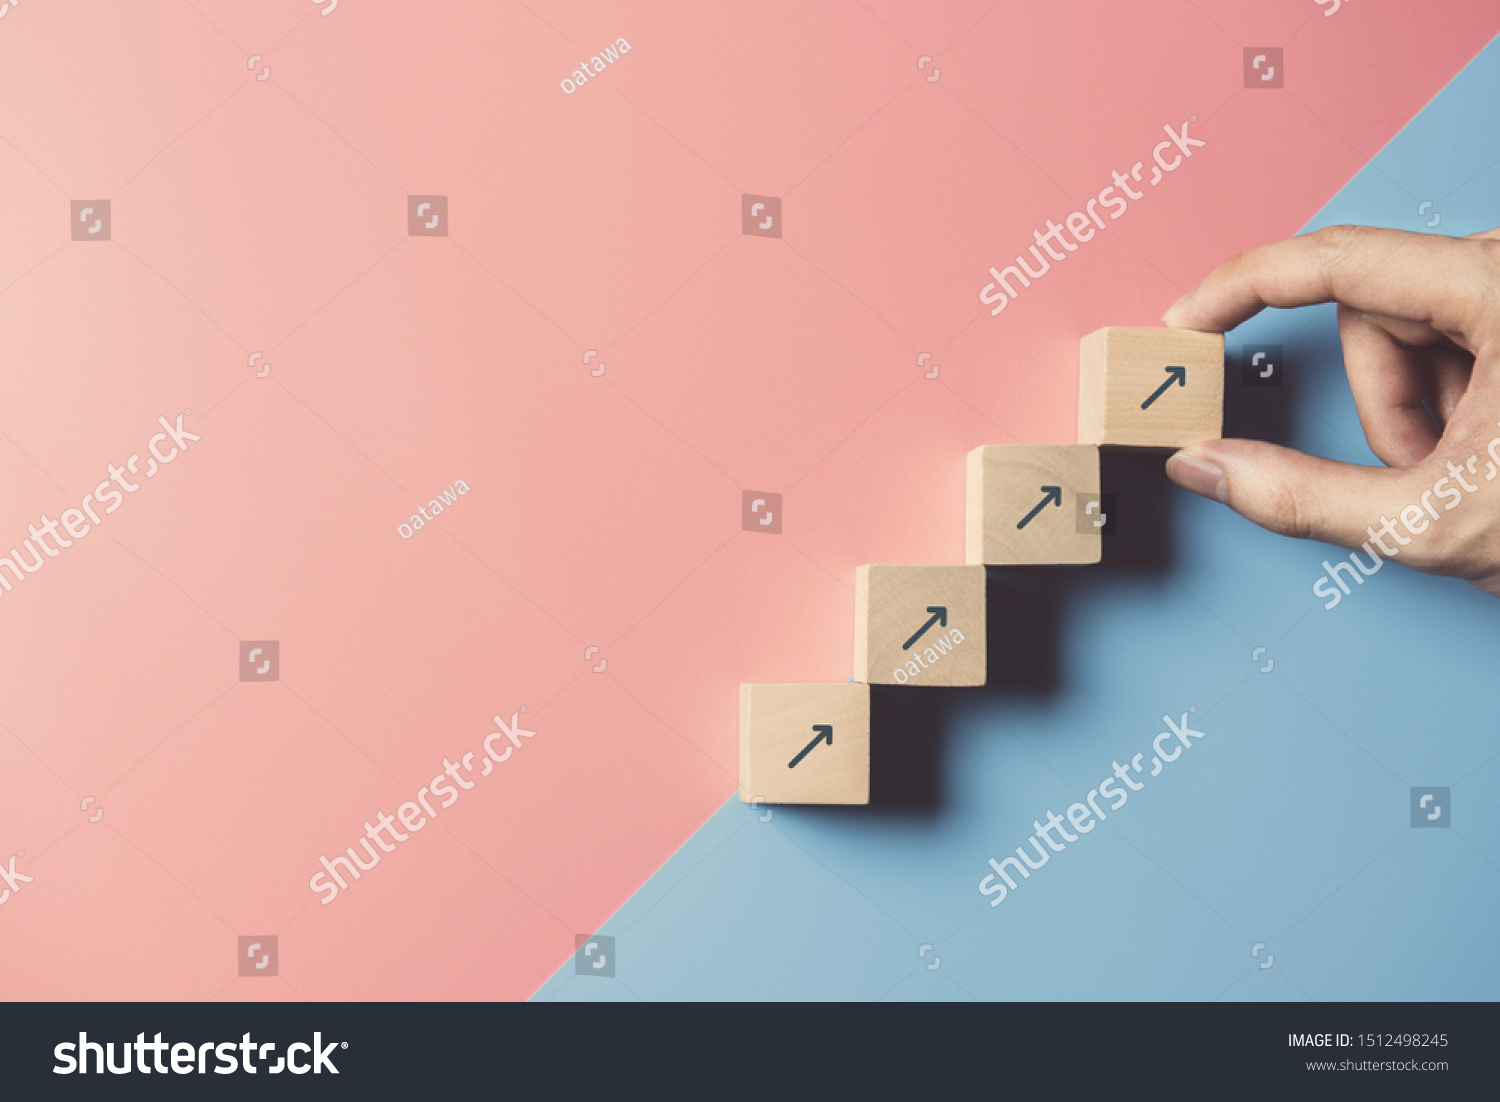 Business concept growth success process, Close up man hand arranging wood block stacking as step stair on paper blue and pink background, copy space. #1512498245